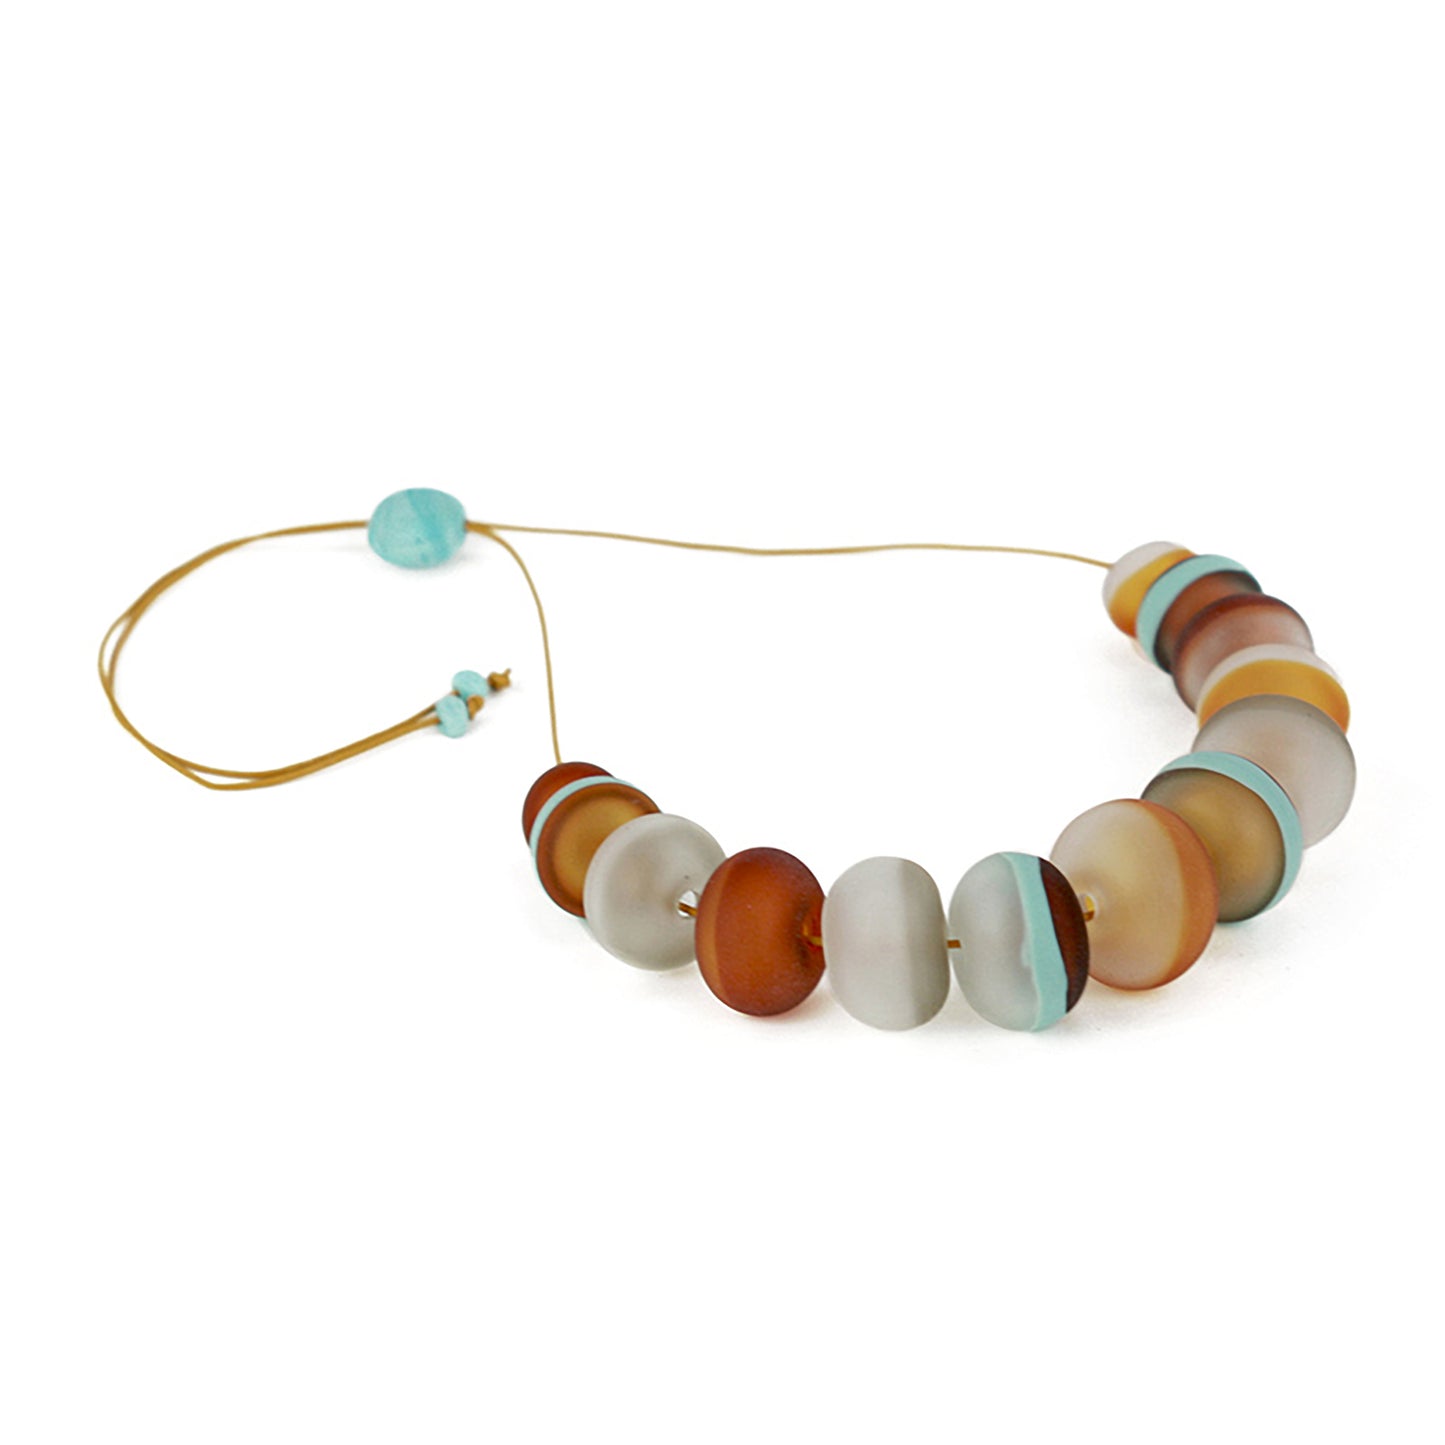 Soft stripes necklace -white, grey, amber and blue